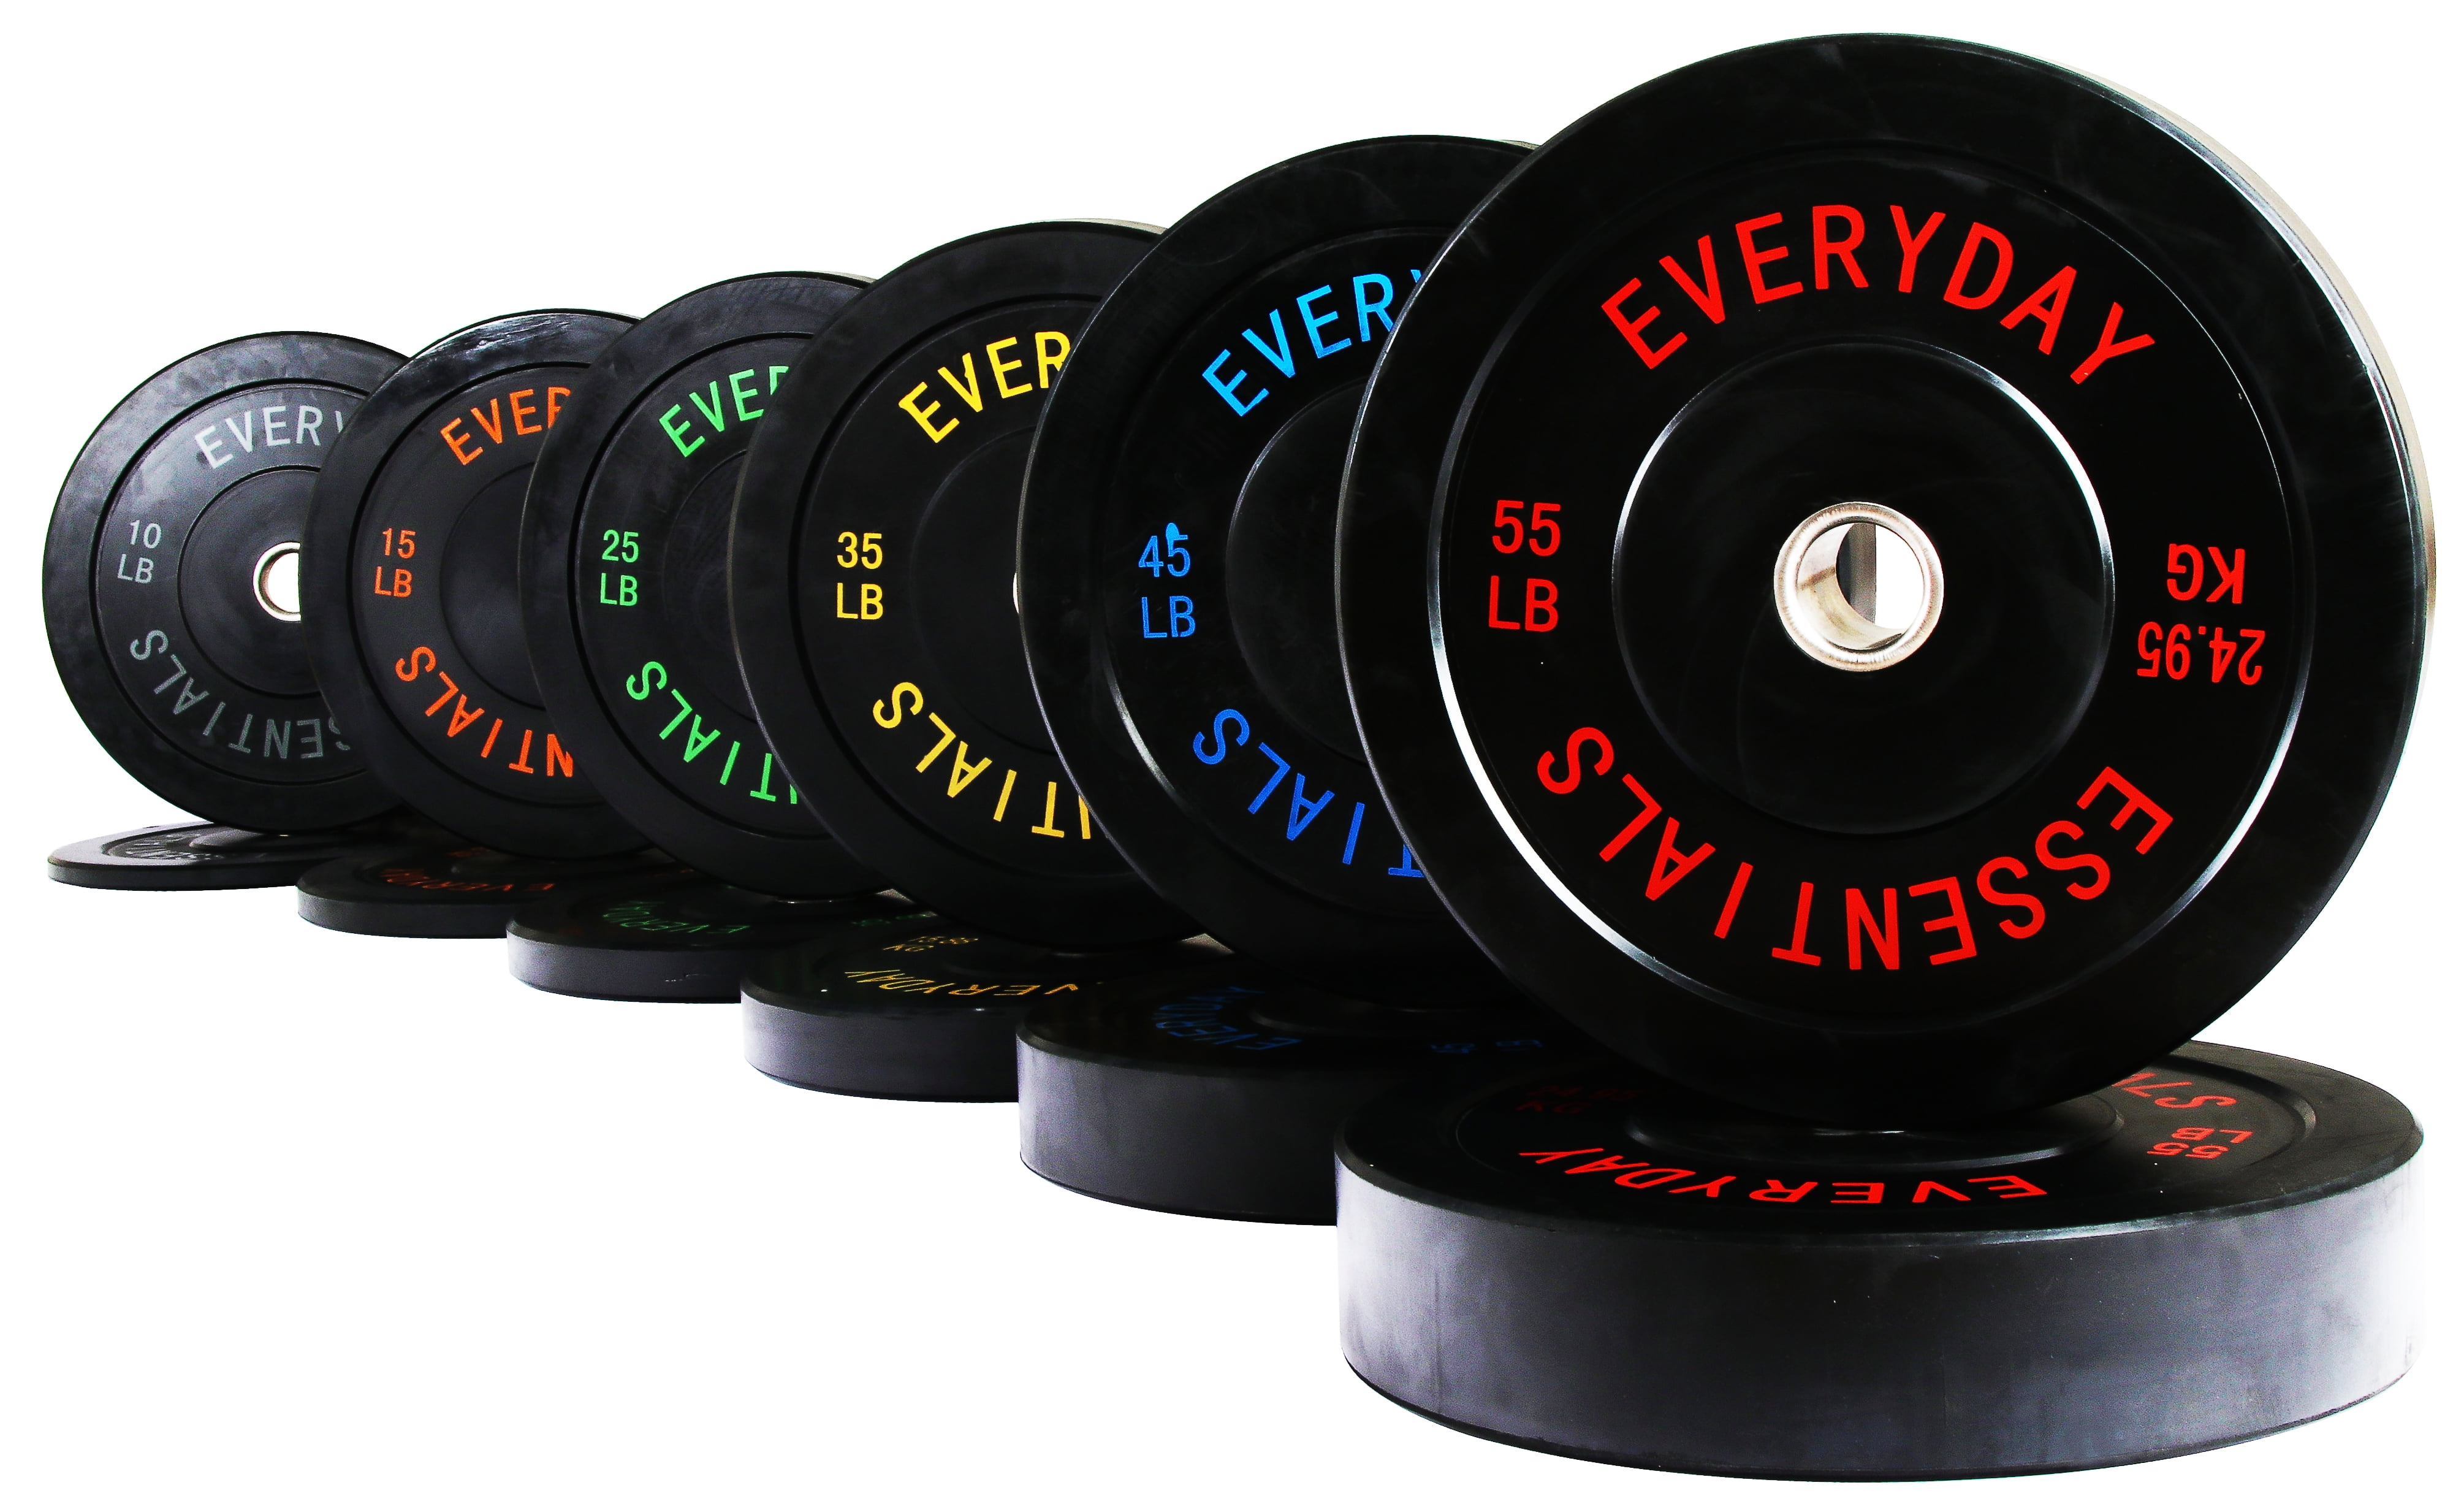 370-Lb BalanceFrom Olympic Bumper Plate Weight Plate Set w/ Steel Hub (Black) $330 ($0.89/Lb) + Free Shipping